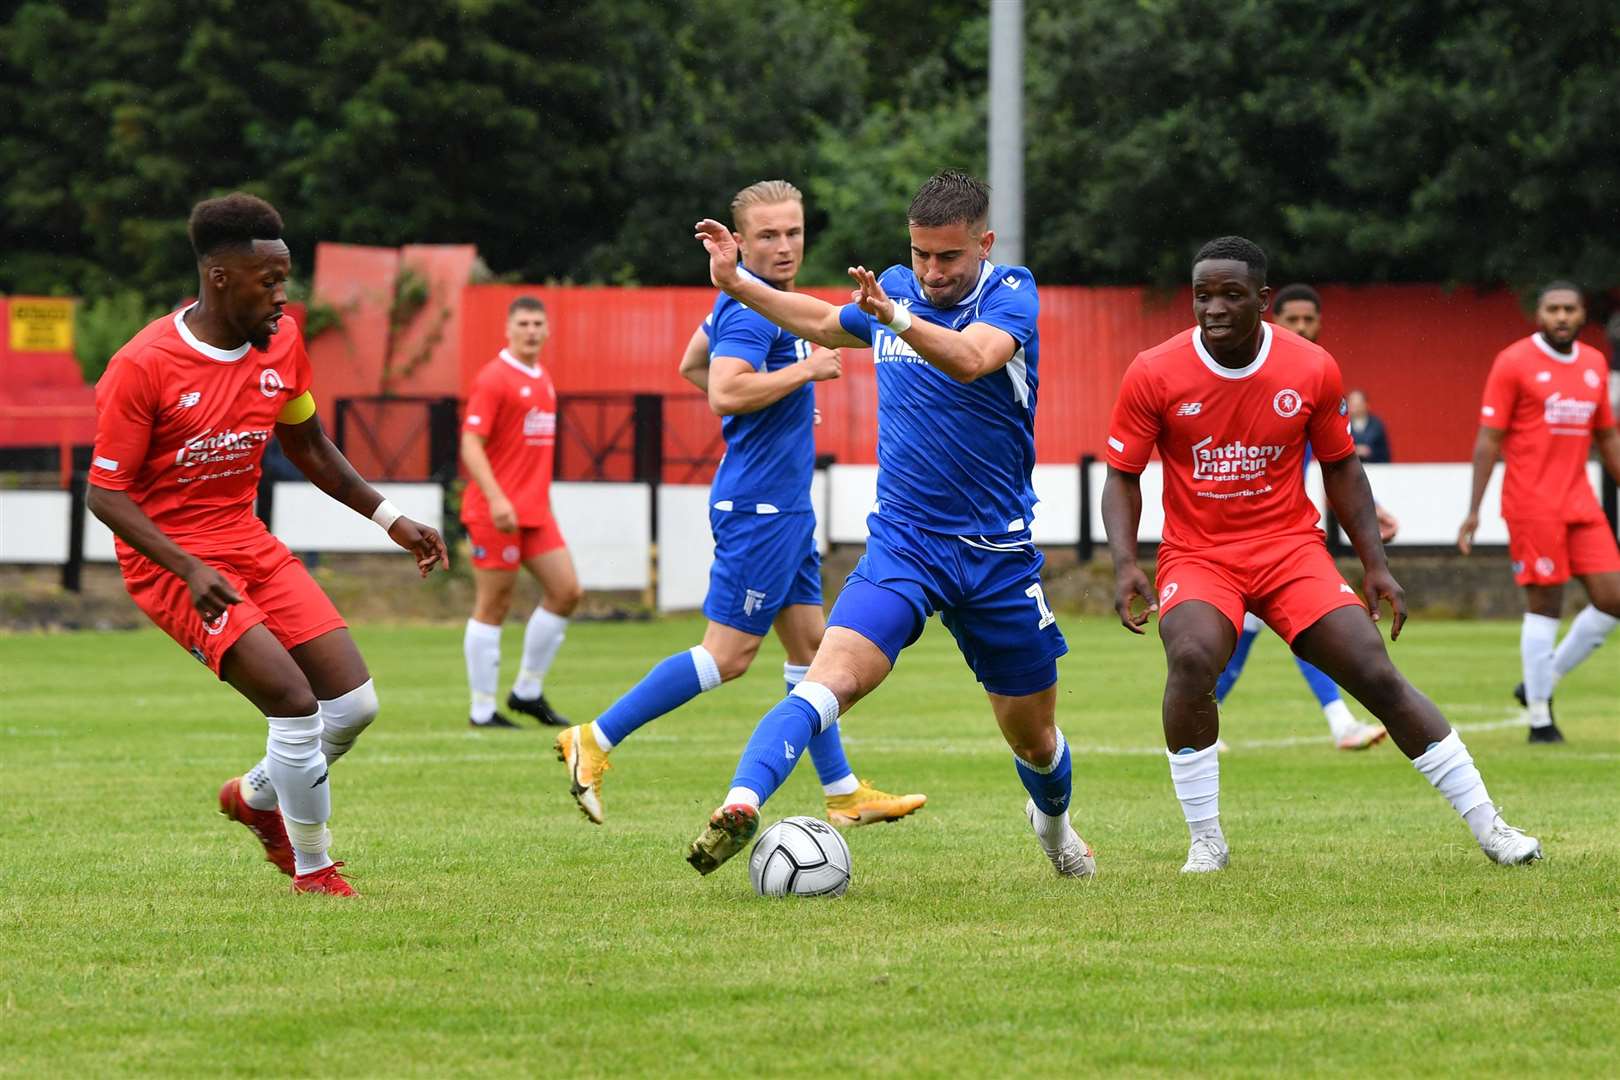 Welling United versus Gillingham, Olly Lee on the ball pre-season Picture: Keith Gillard (49062388)